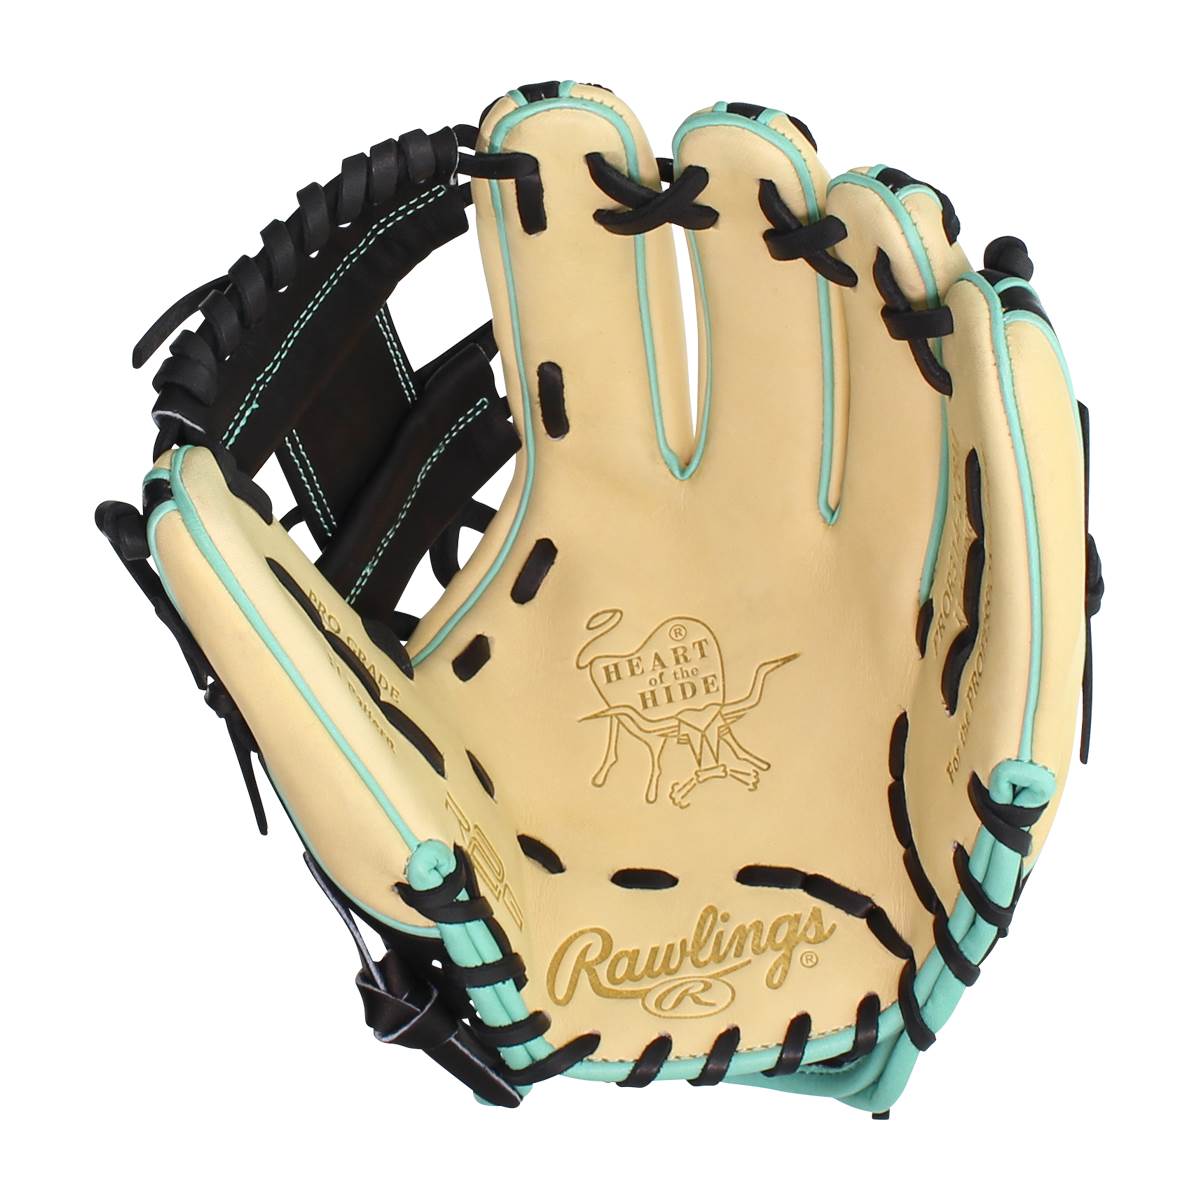 Rawlings Heart of the Hide R2G 11.5 inch Infield Glove PROR314-2CBM